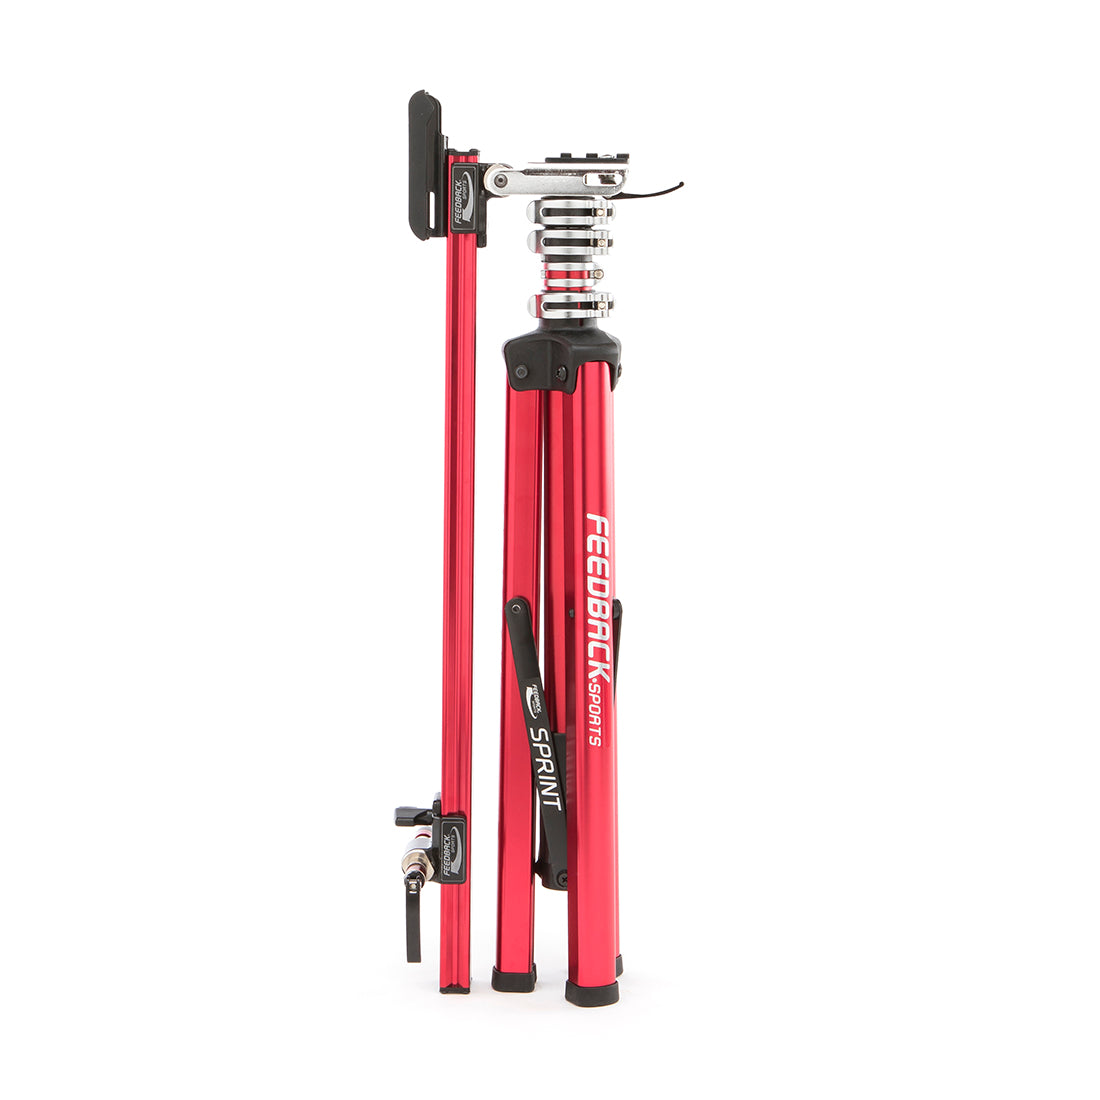 Feedback Sports Sprint repair stand folded not in use on white.